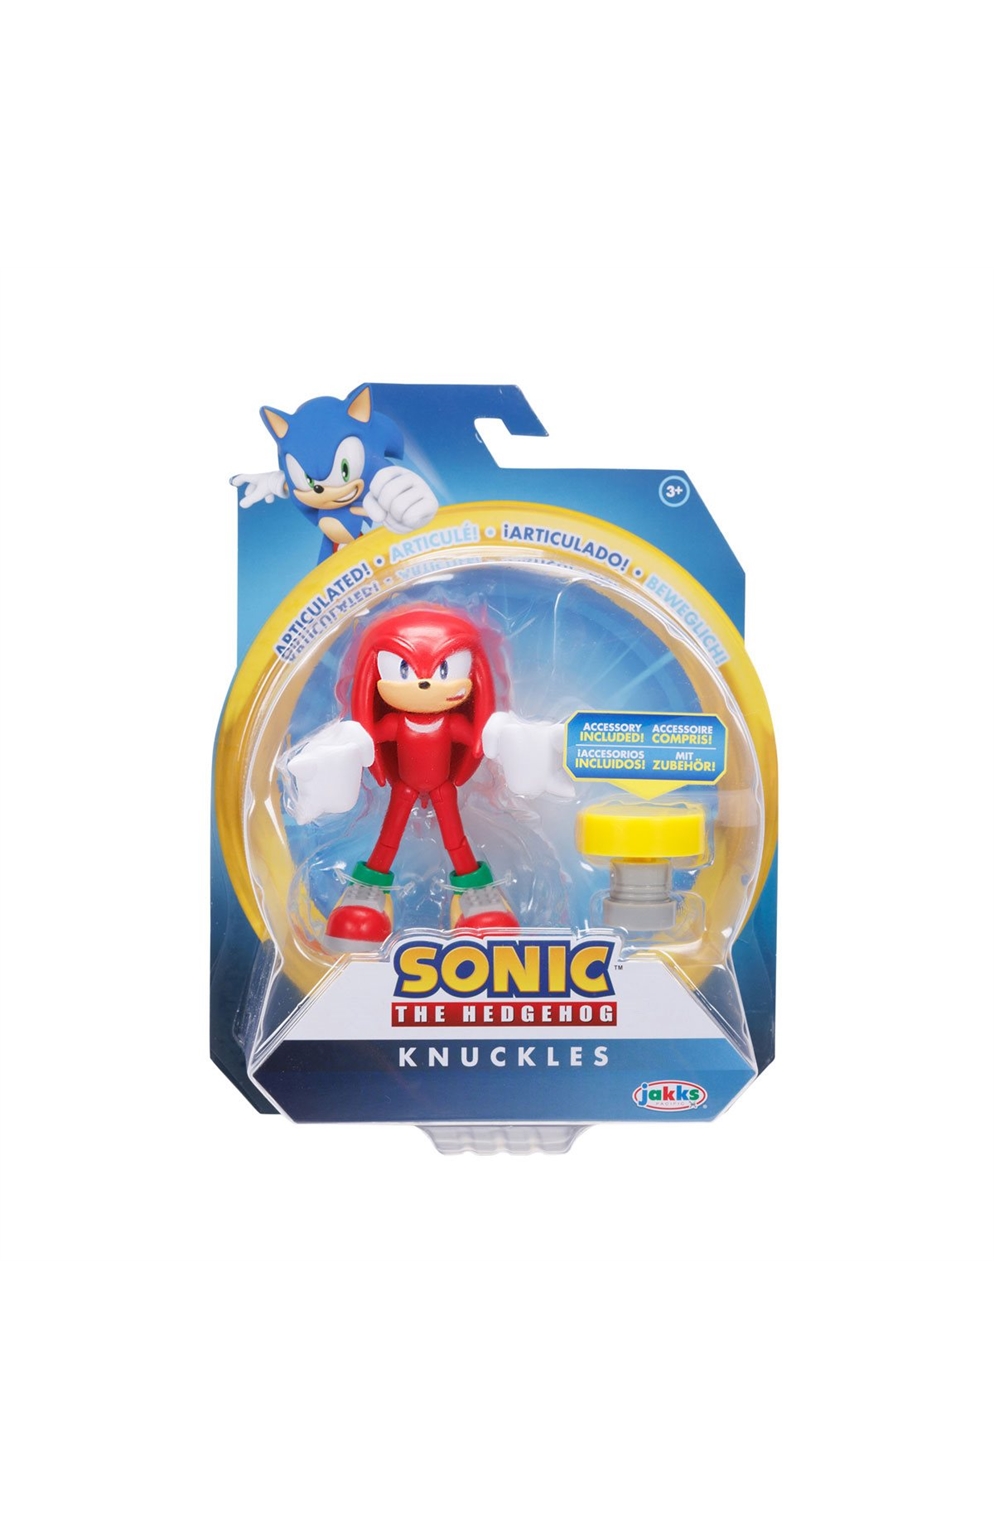 Sonic 4-Inch Figures With Accessory Wave 14 – Knuckles